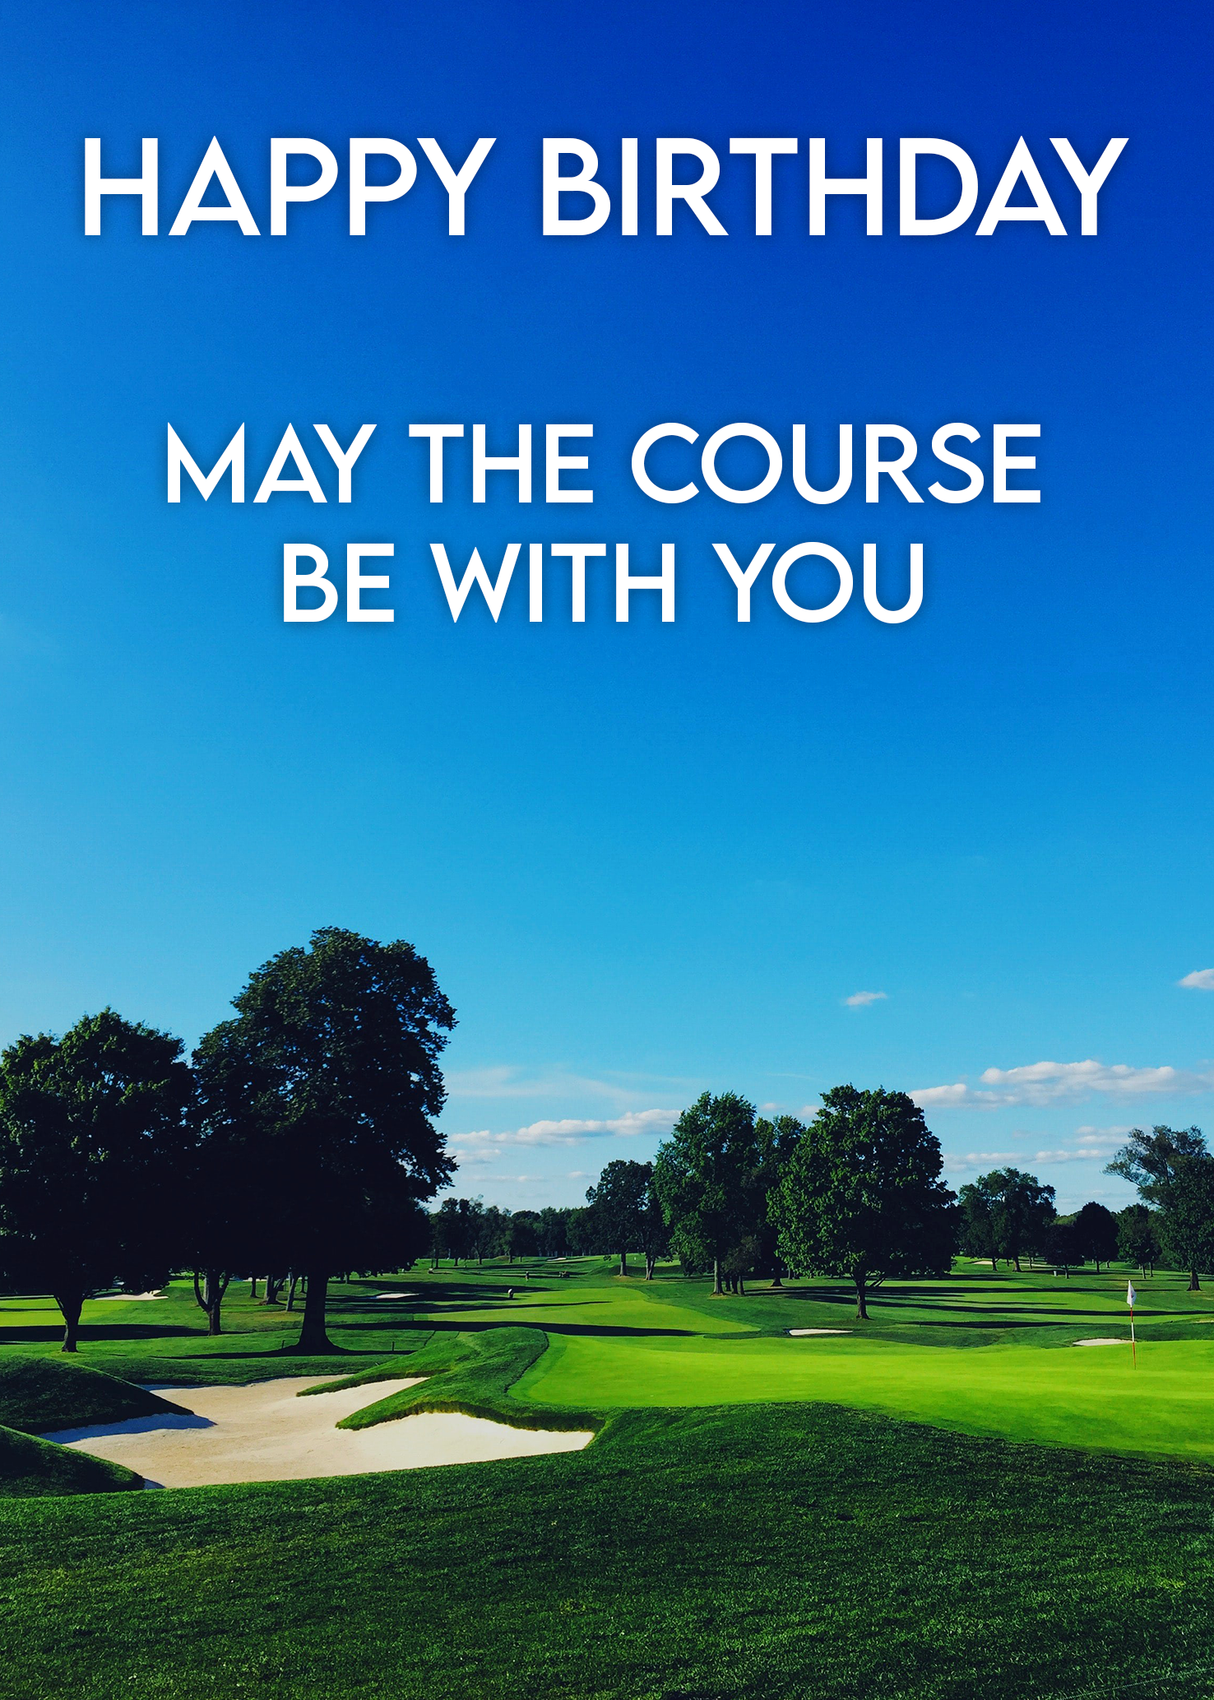 Course Be With You